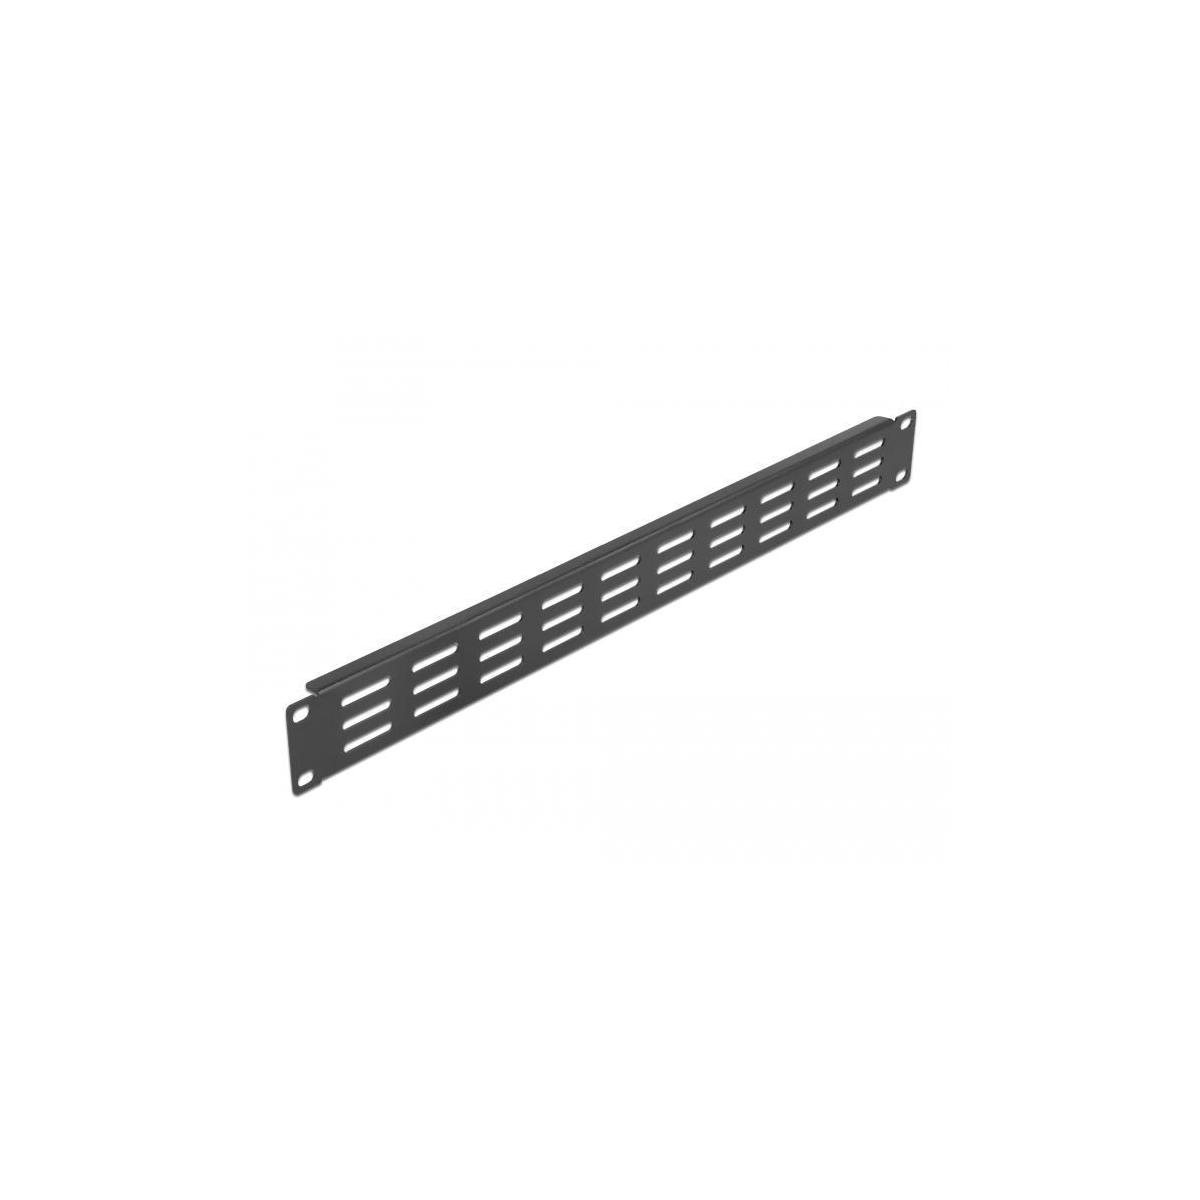 Patchpanel 66679, DELOCK